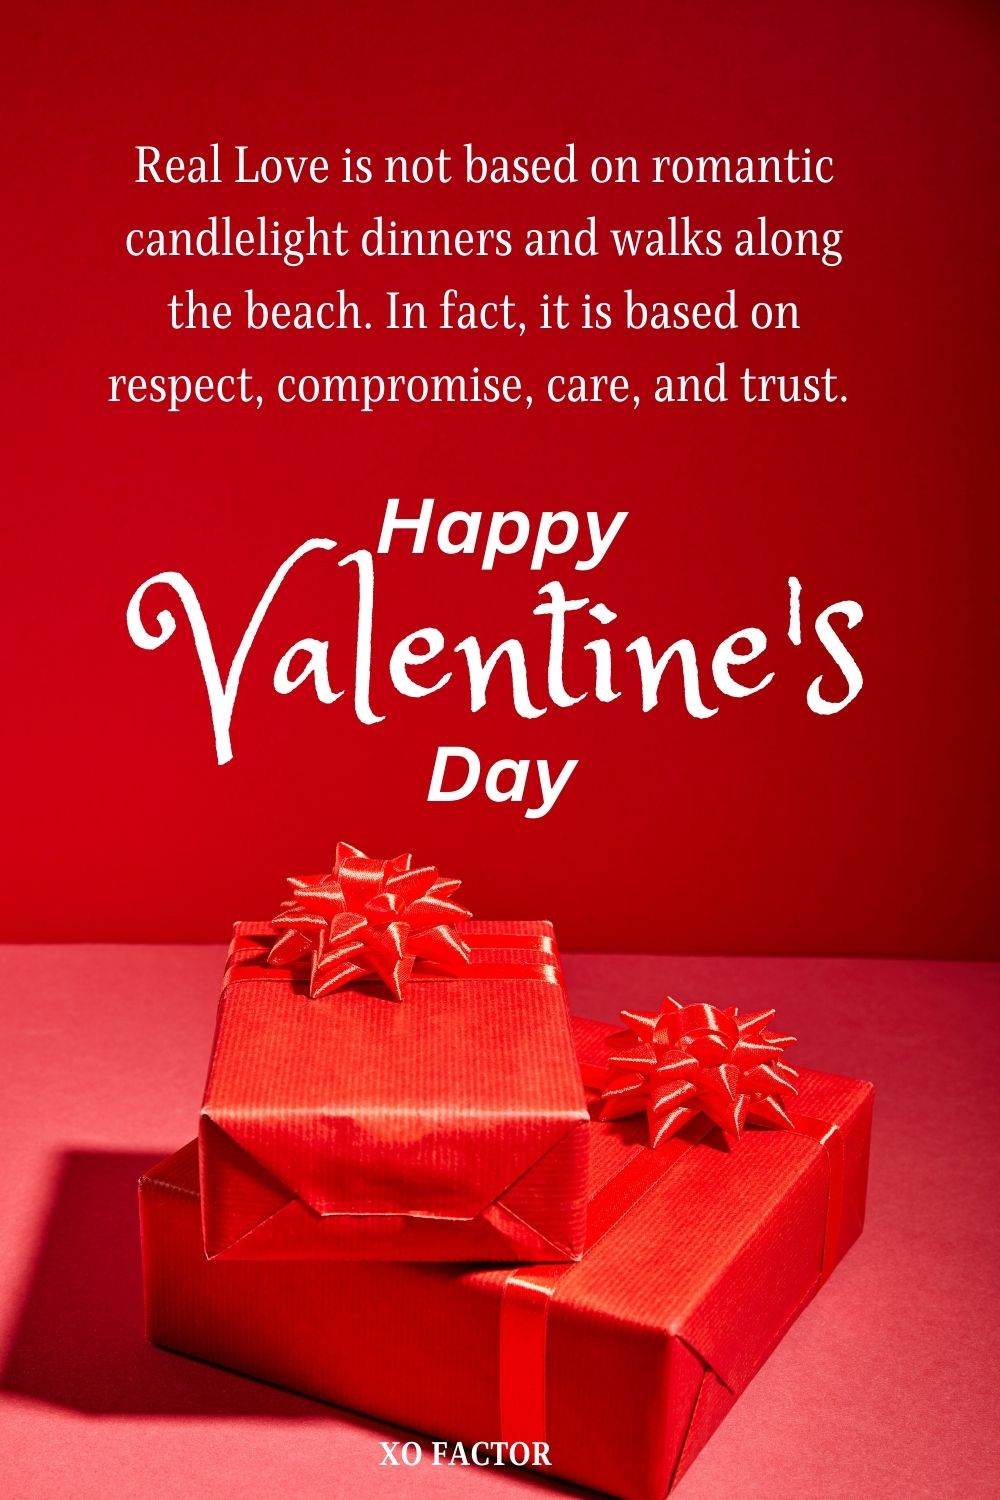 Real Love is not based on romantic candlelight dinners and walks along the beach. In fact, it is based on respect, compromise, care, and trust. Happy Valentine’s Day!